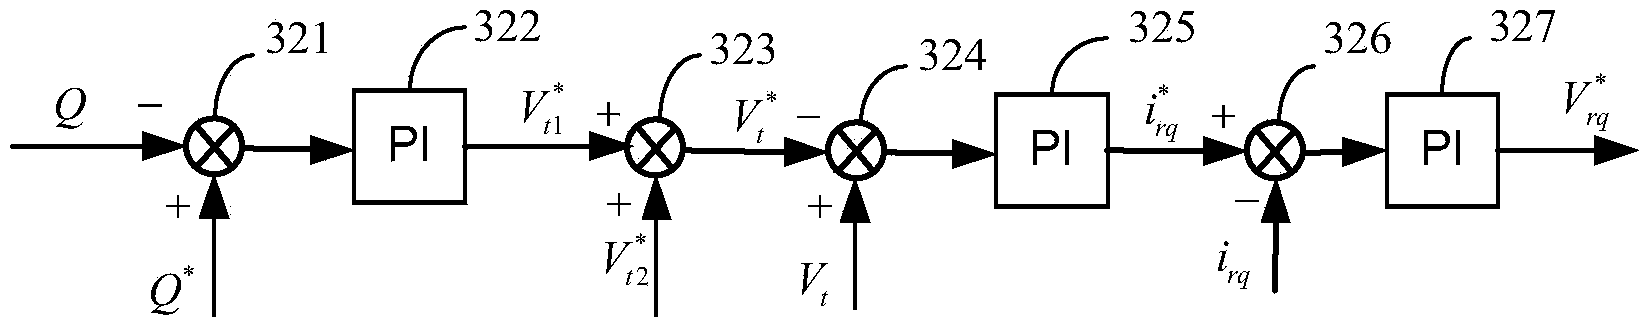 Double-fed wind power generation system based on vector power system stabilizer